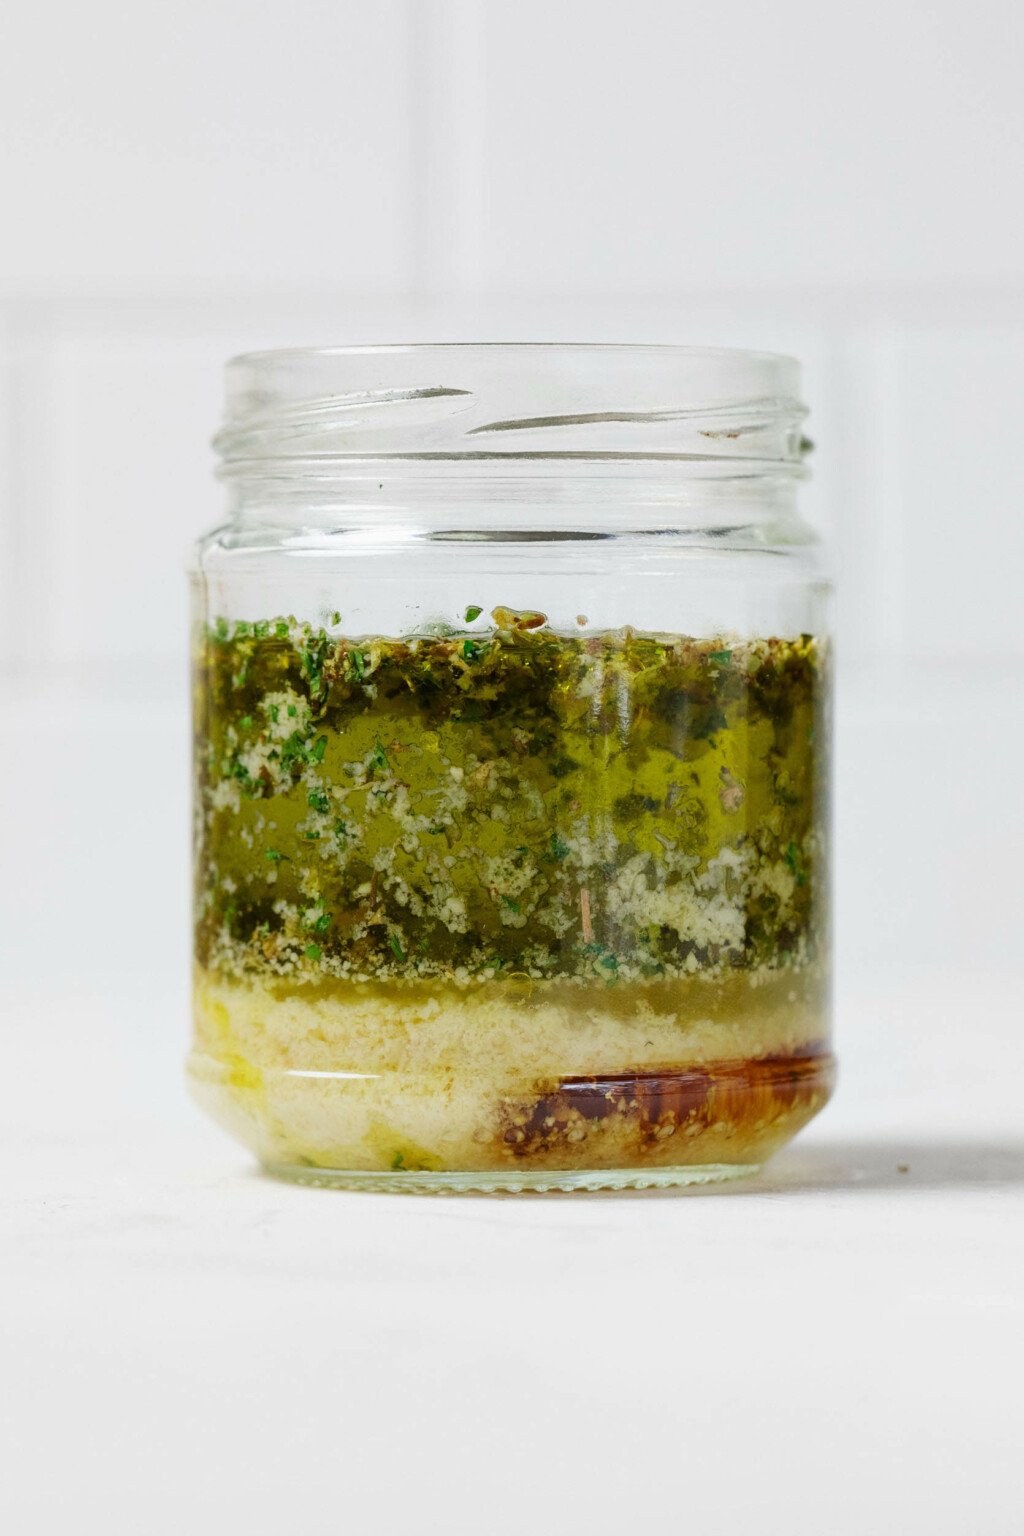 A glass gar is pictured angled, with a white surface in the background. The jar is filled with olive oil and other ingredients for a vinaigrette dressing.